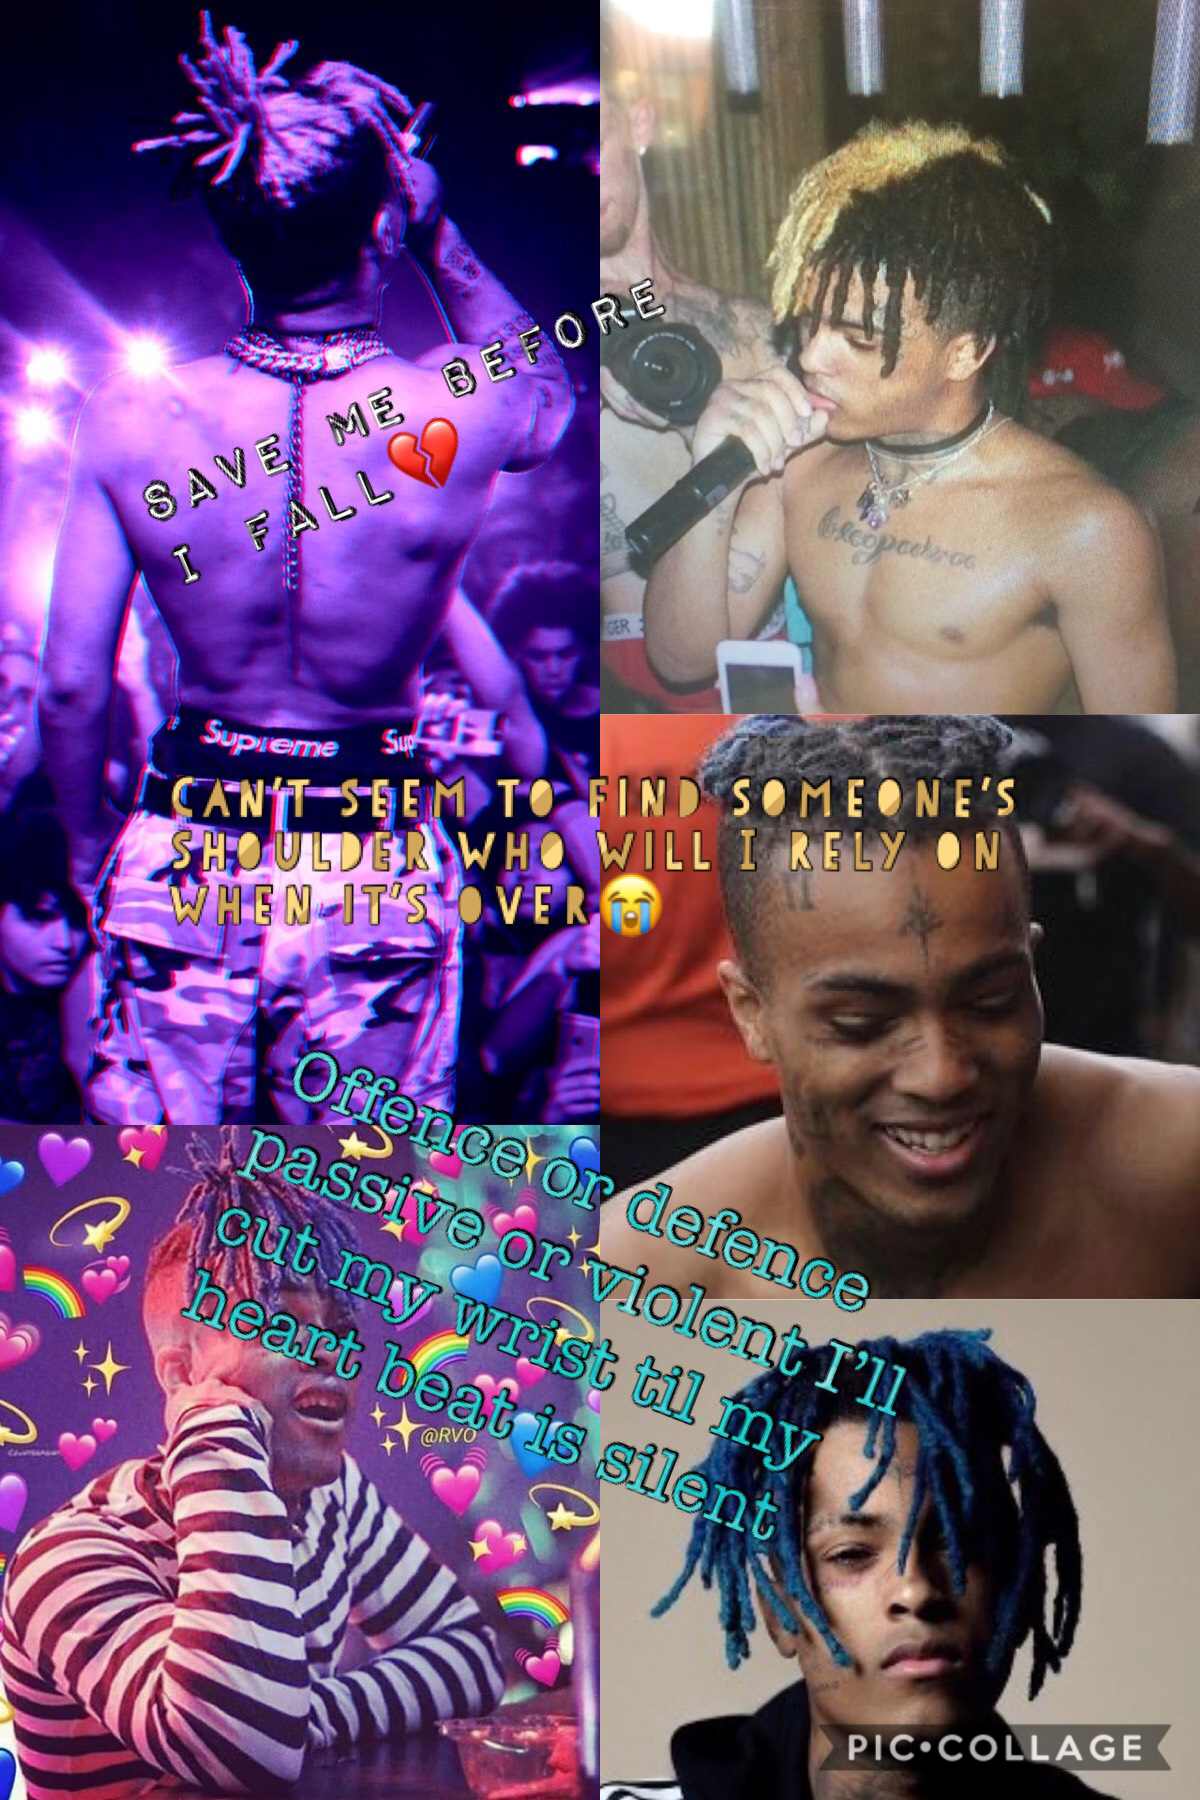 I rlly am missing u jahseh😭💔i can’t get over that u passed, ur music is the best, and u rlly helped a lot of ppl thank u🖤